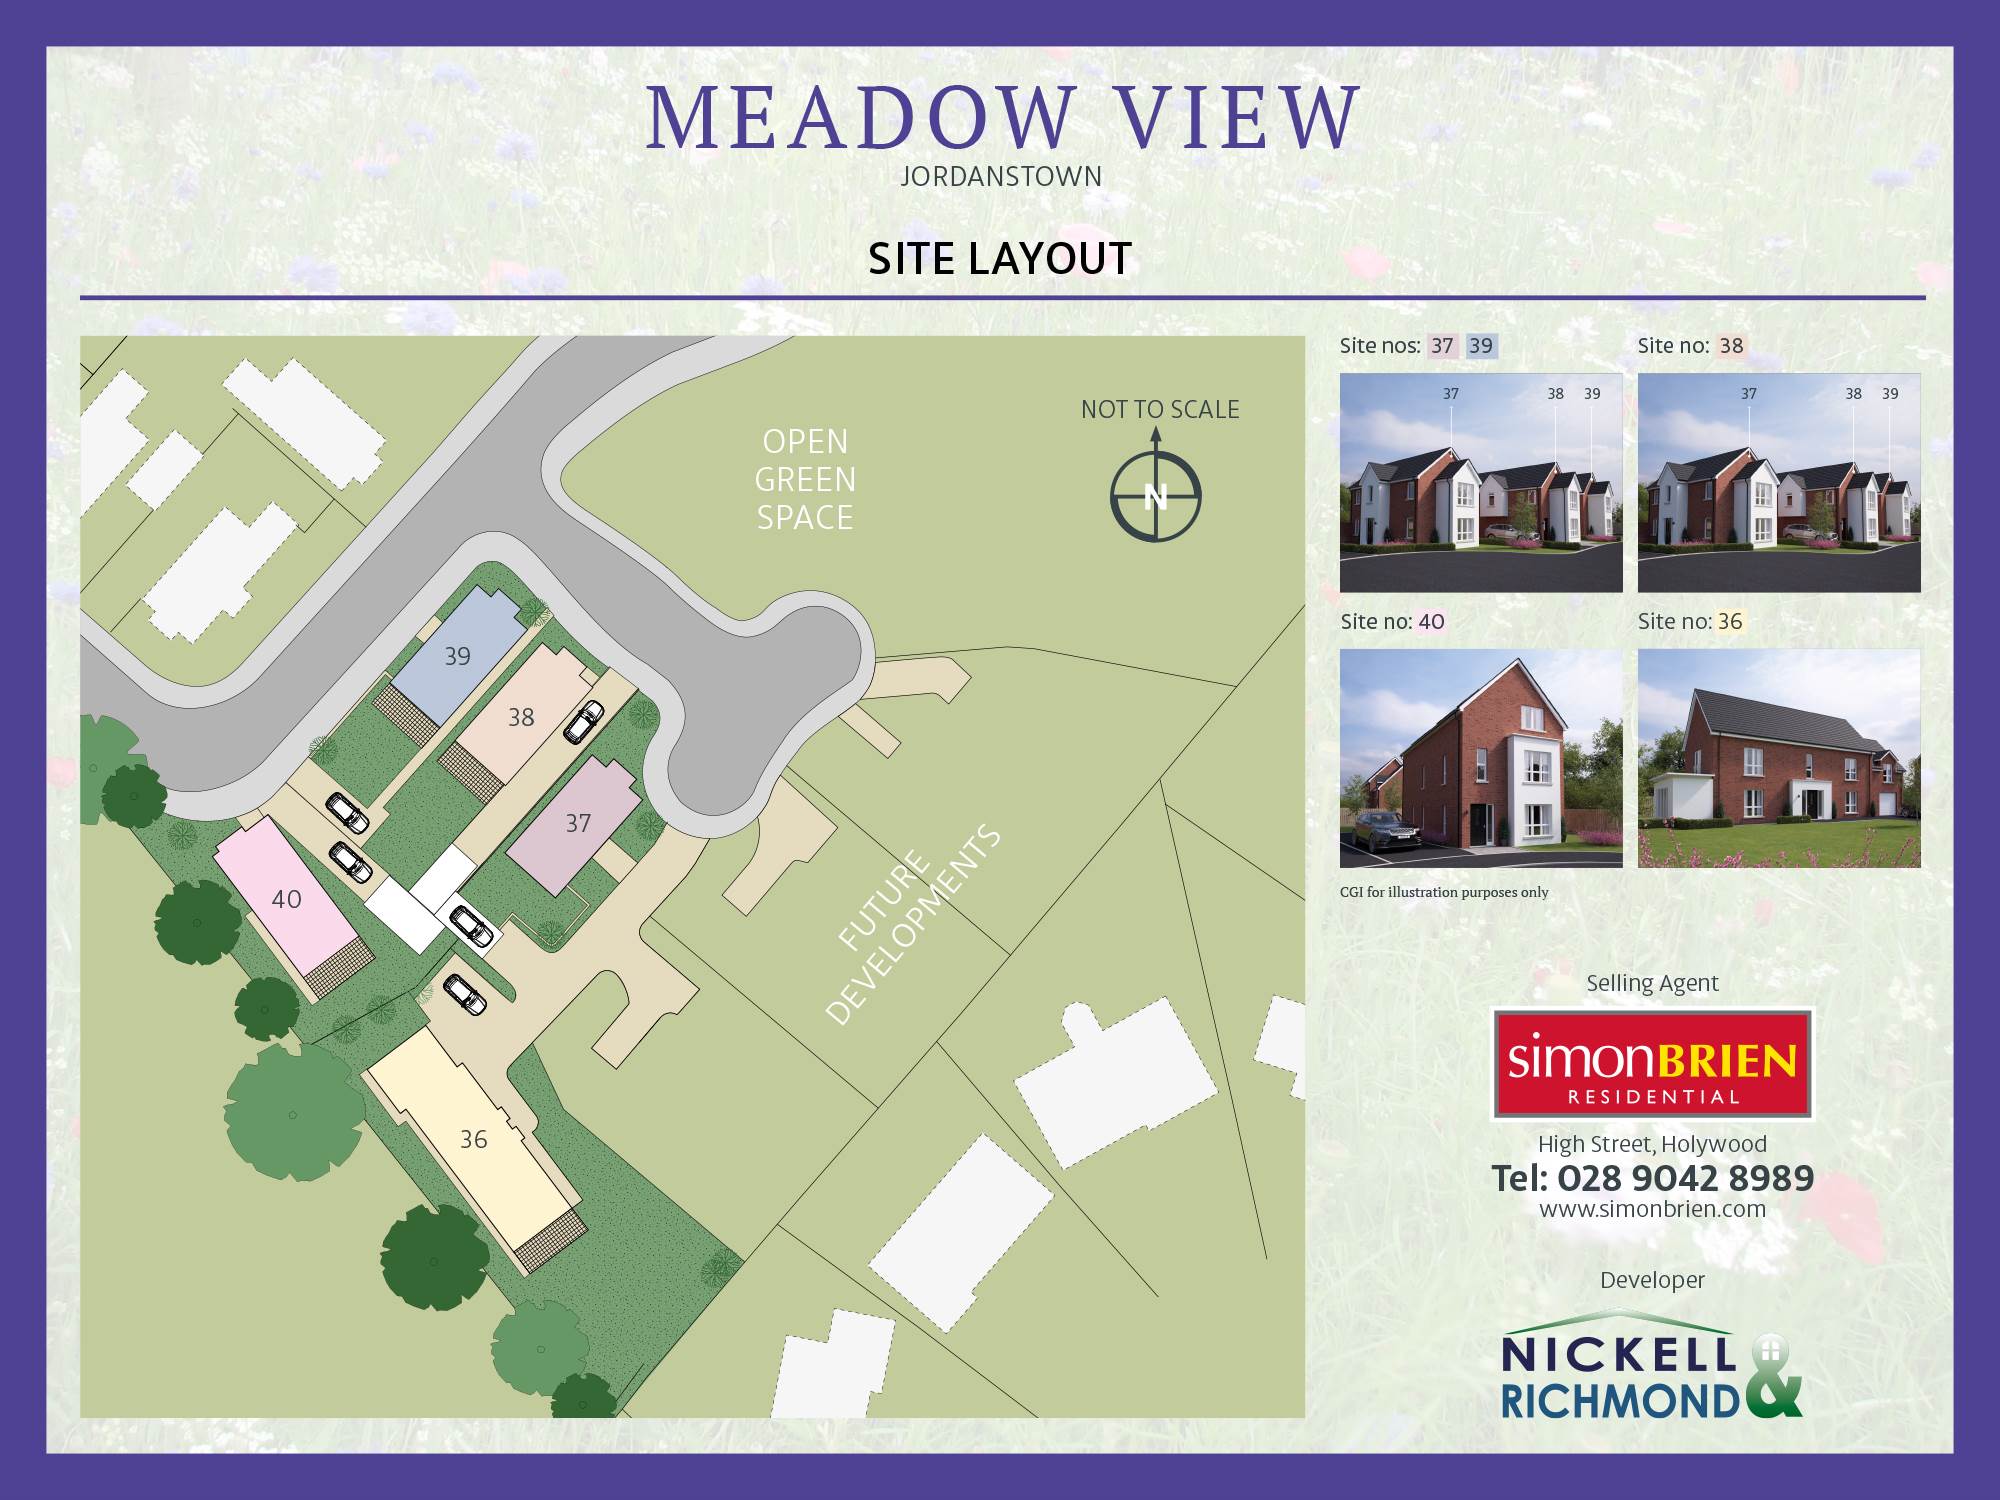 40 Meadow View